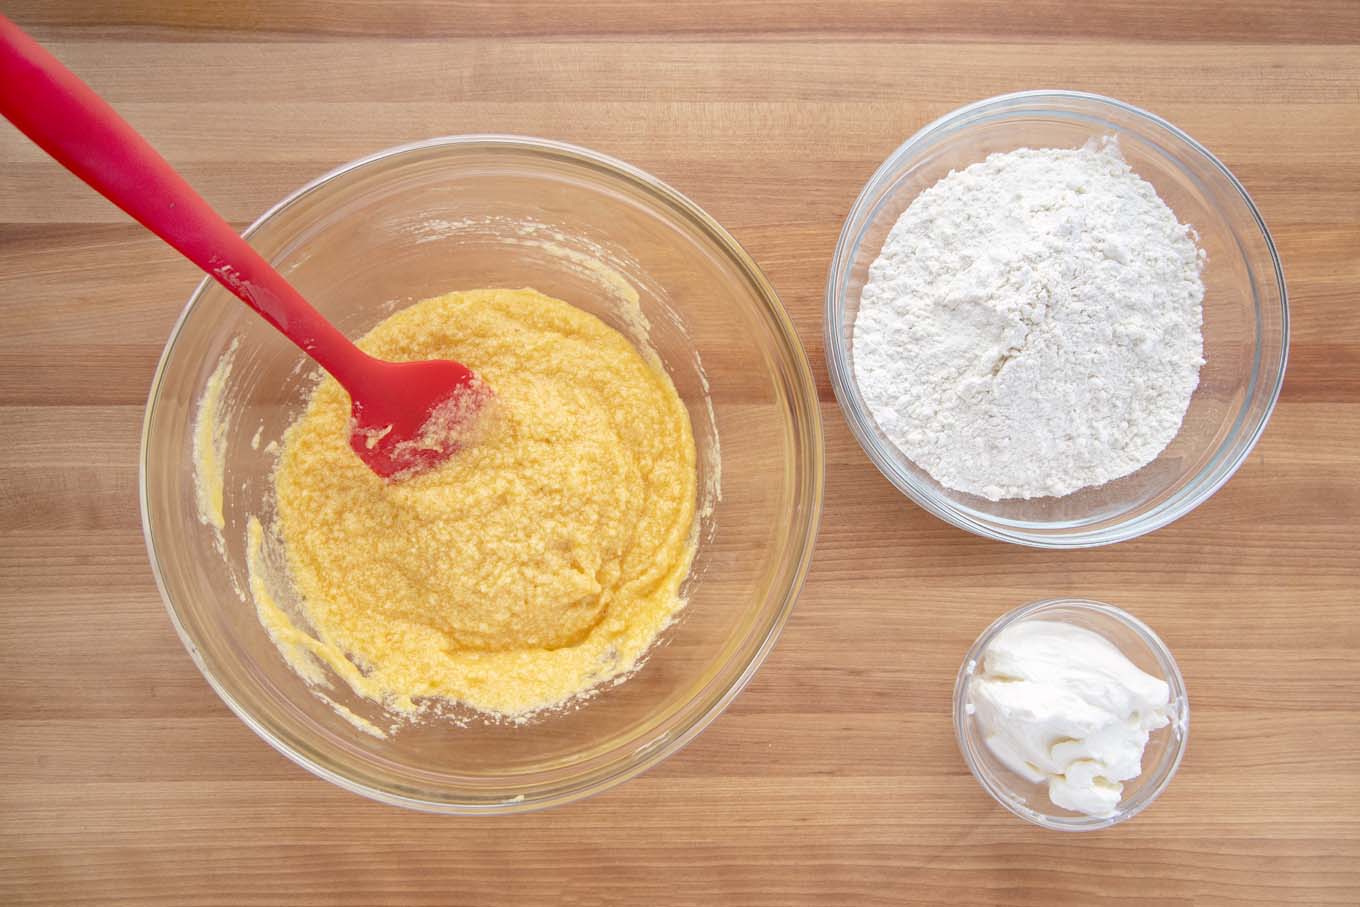  ingredients to make the batter